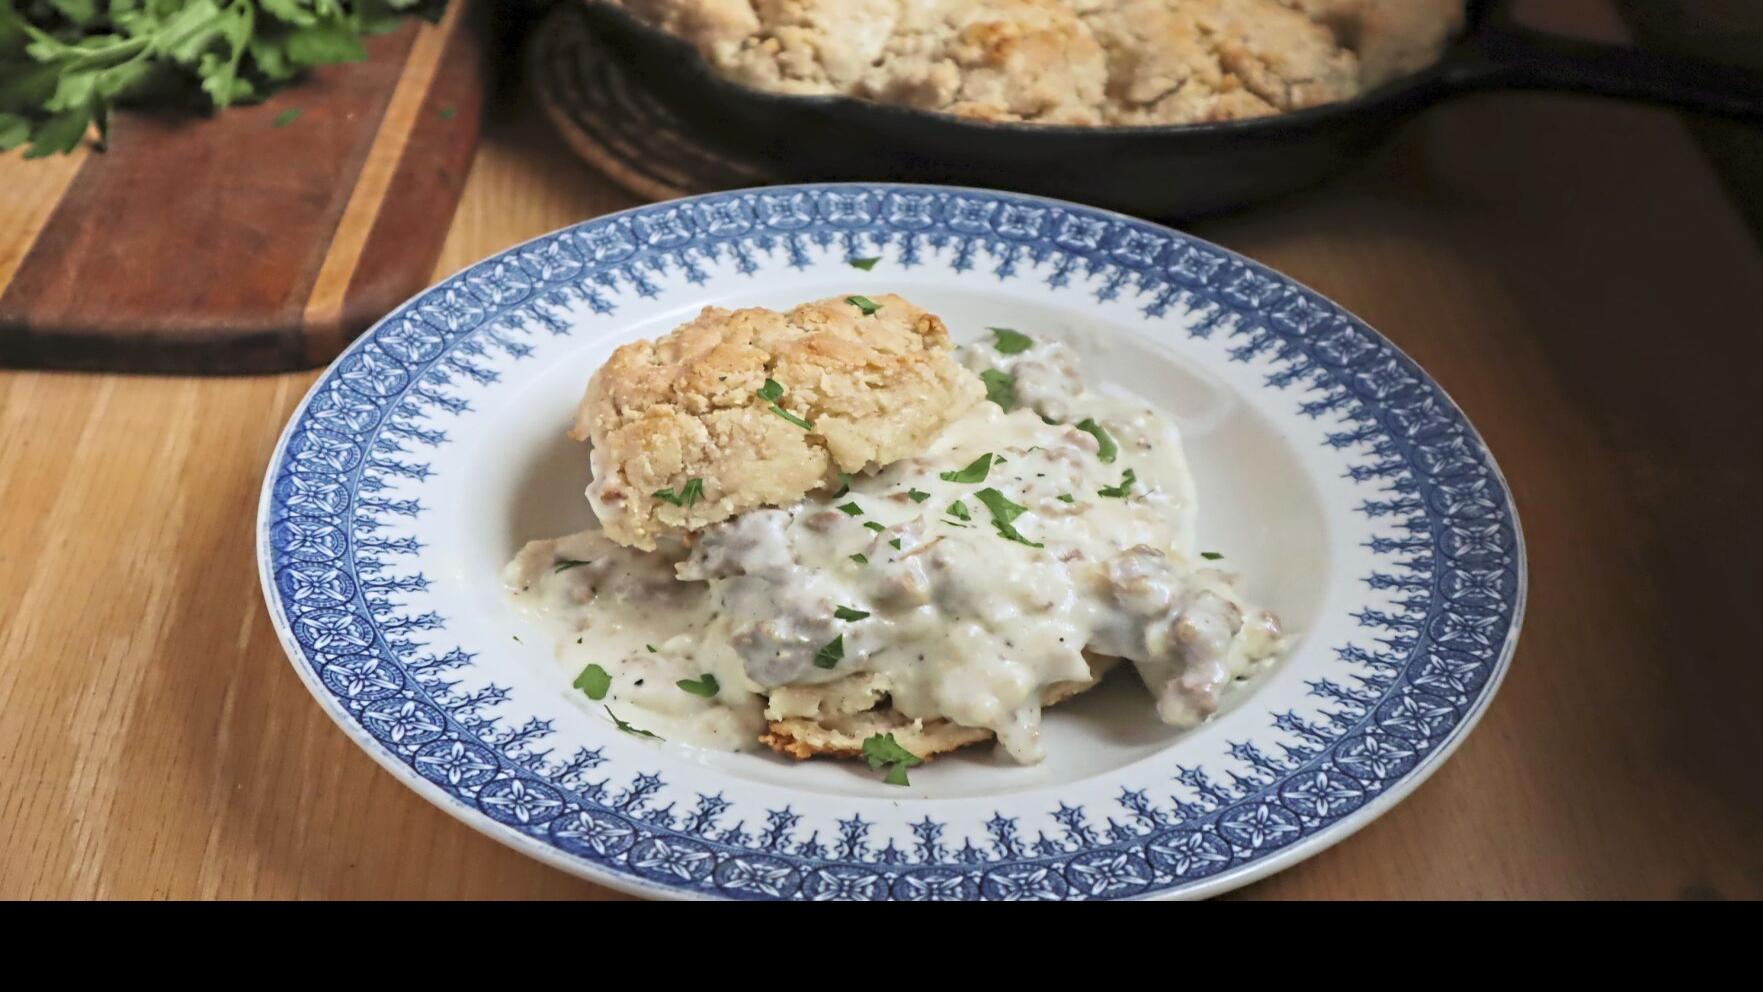 In gravy or on mac & cheese, biscuits offer a warm Southern welcome, Food